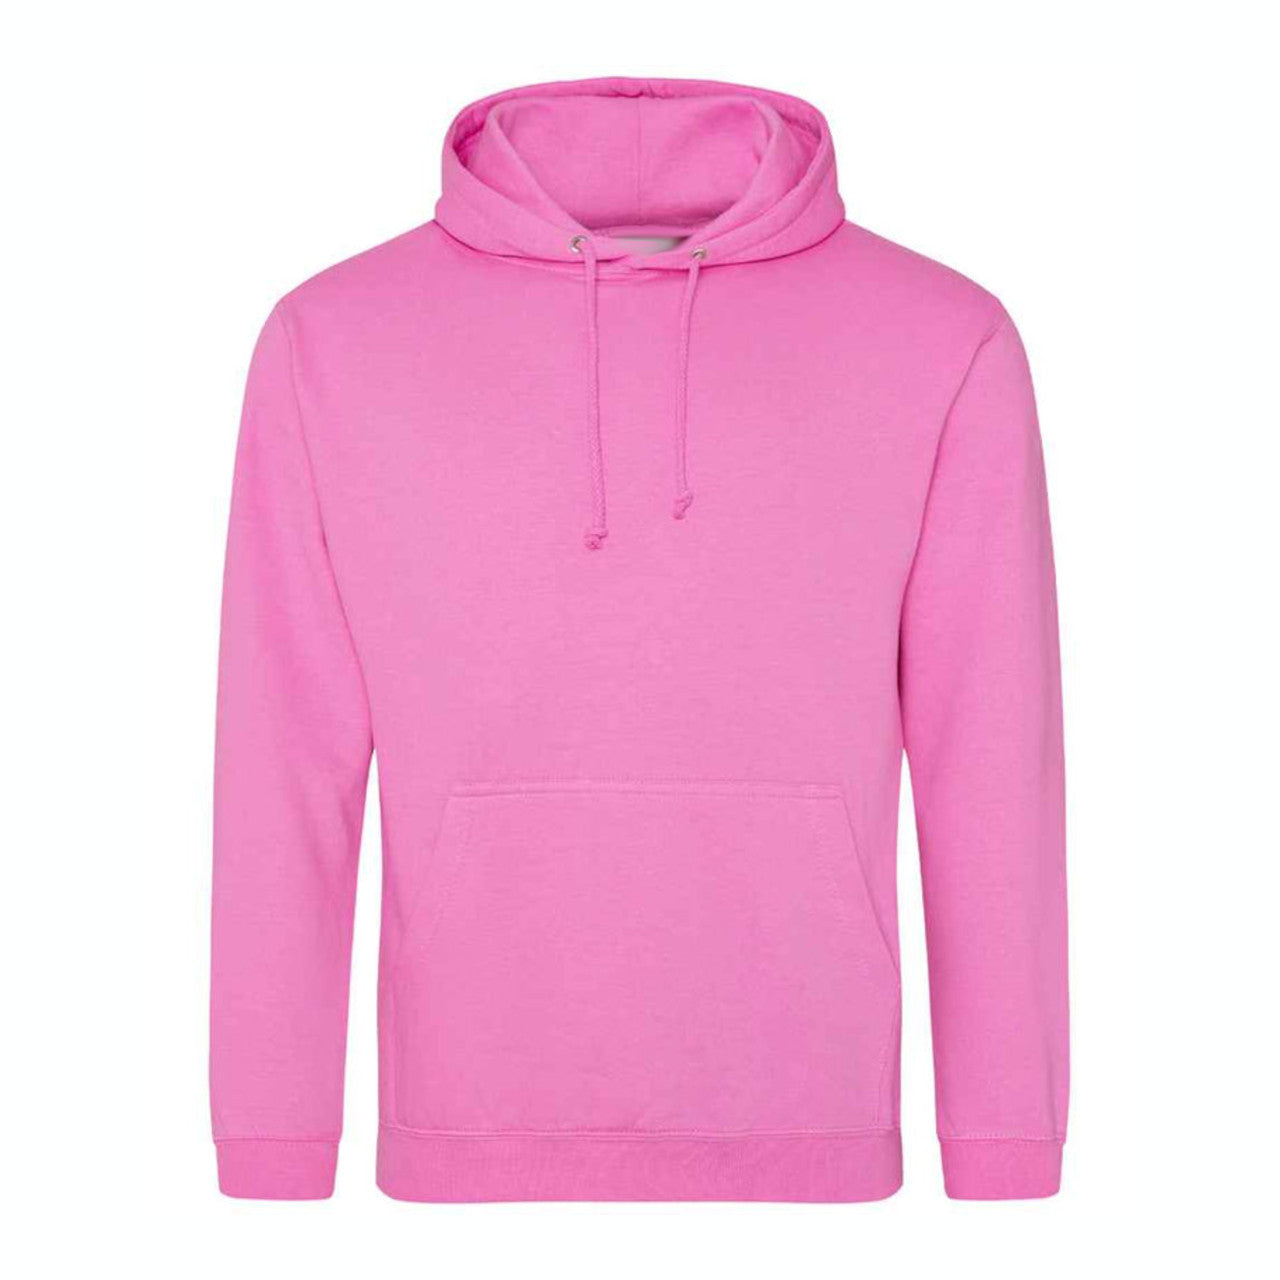 Rest in Pieces Unisex Pullover Hoody in Candyfloss